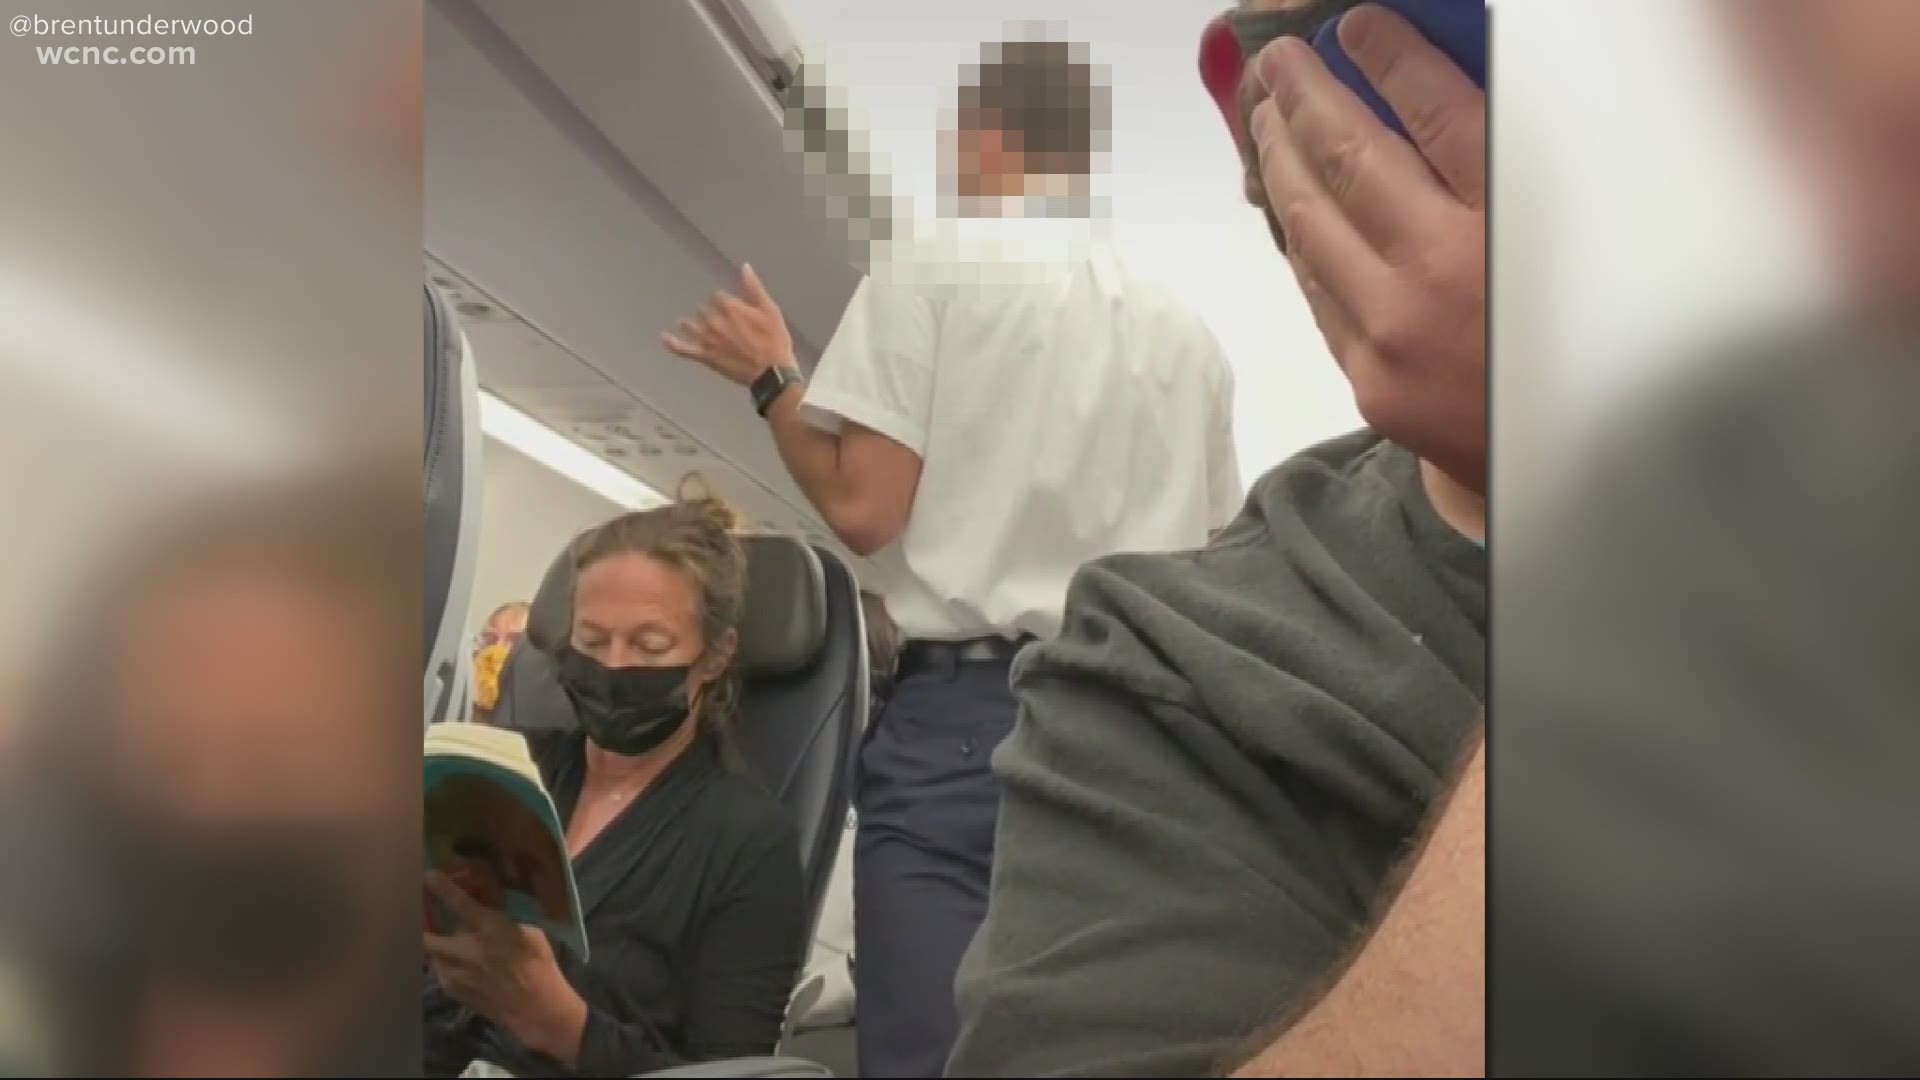 One video shows the lead flight attendant saying he won't tolerate disrespect by passengers for the crew. The flight was diverted to Raleigh due to weather.